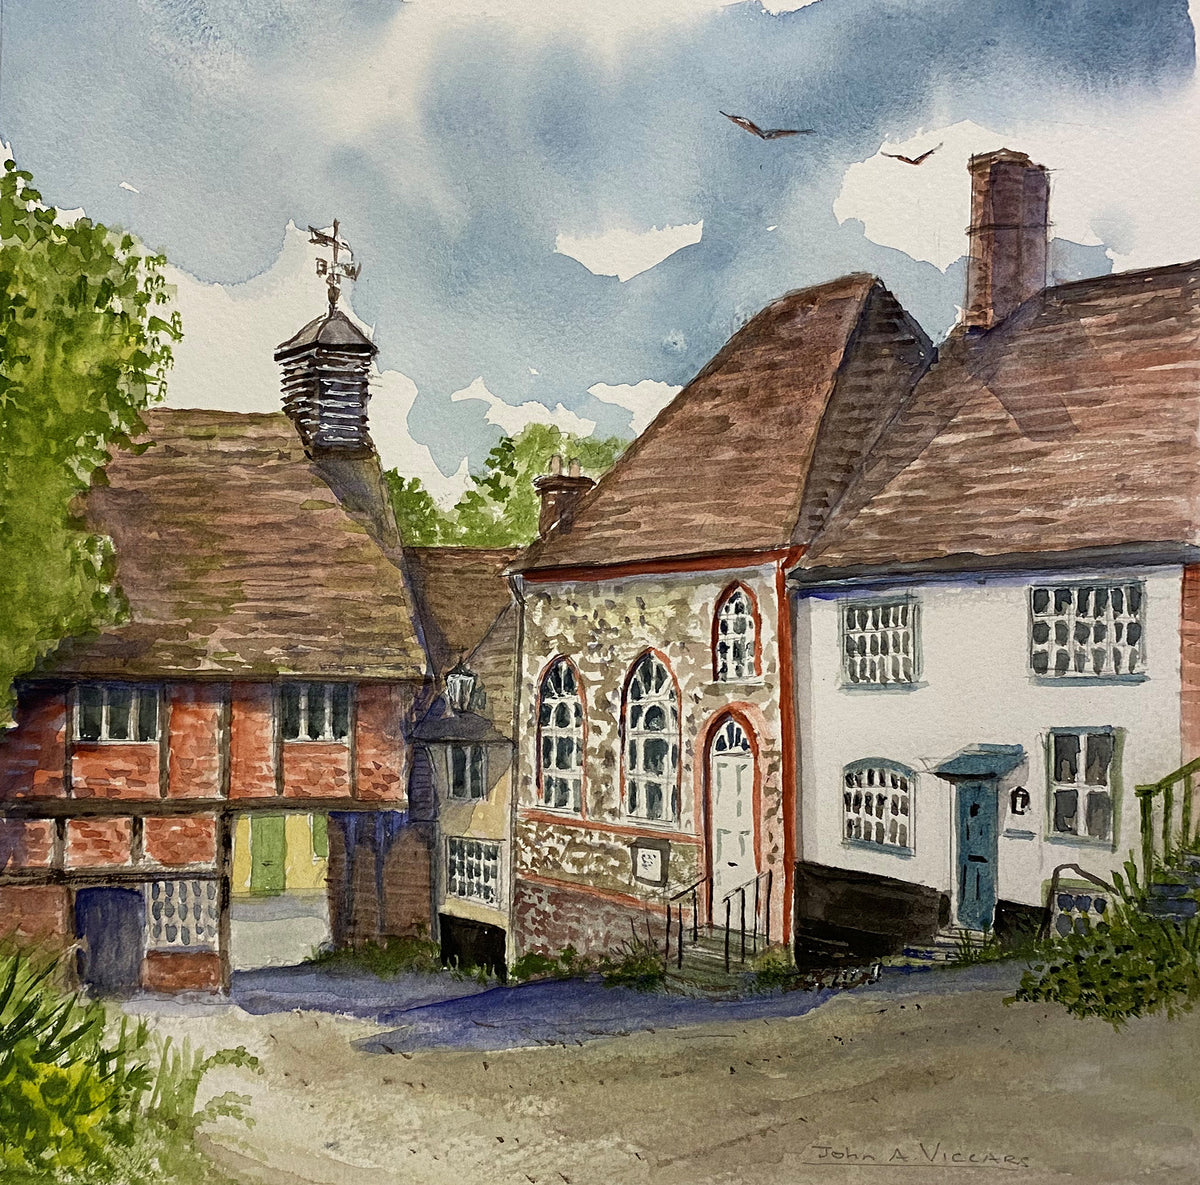 Church Lane, West Wycombe - watercolour by John A. Viccars